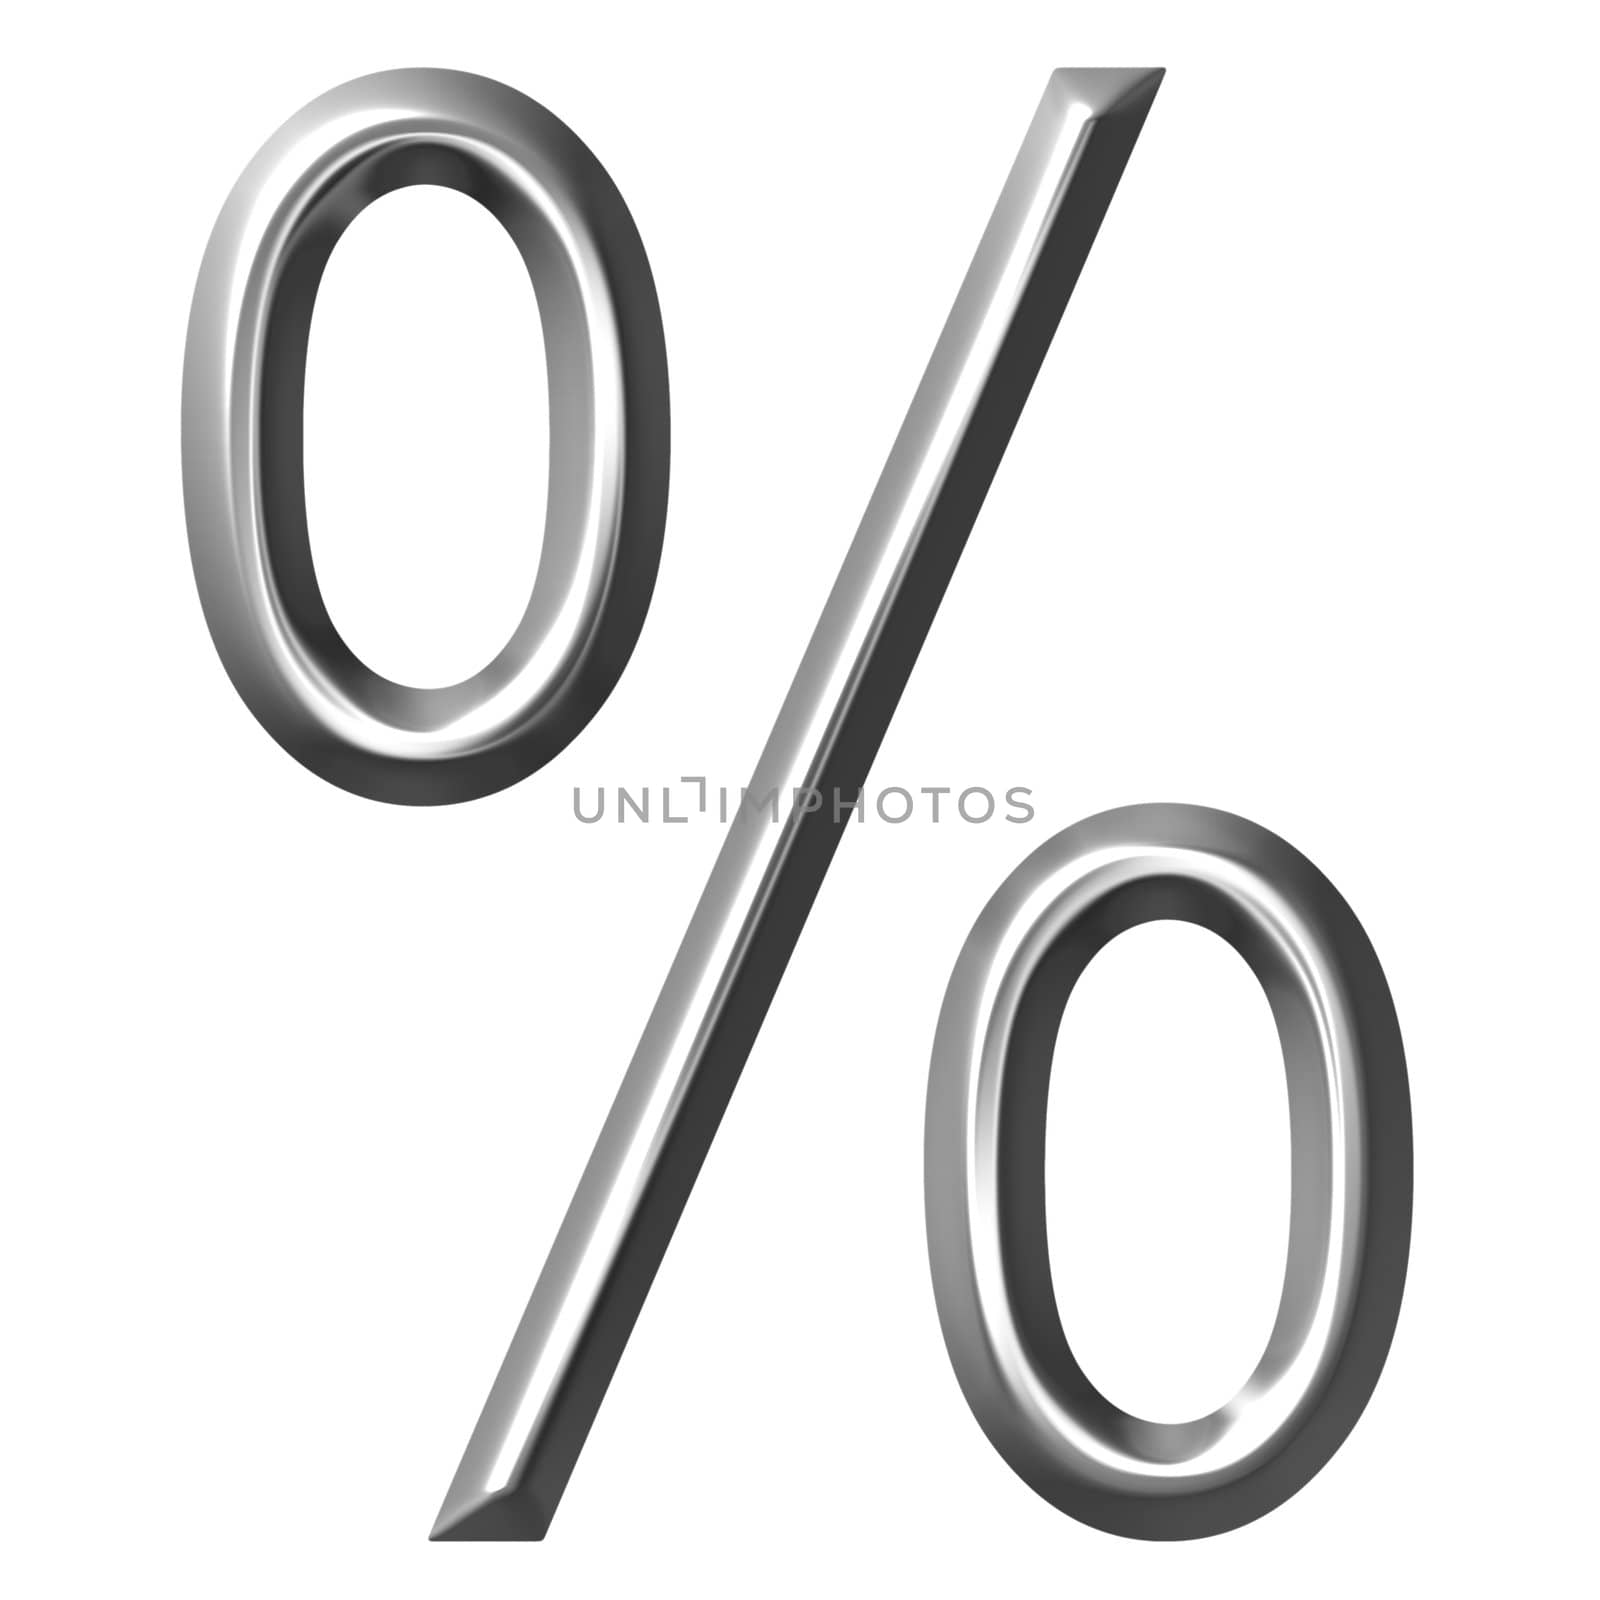 3d silver percent symbol isolated in white